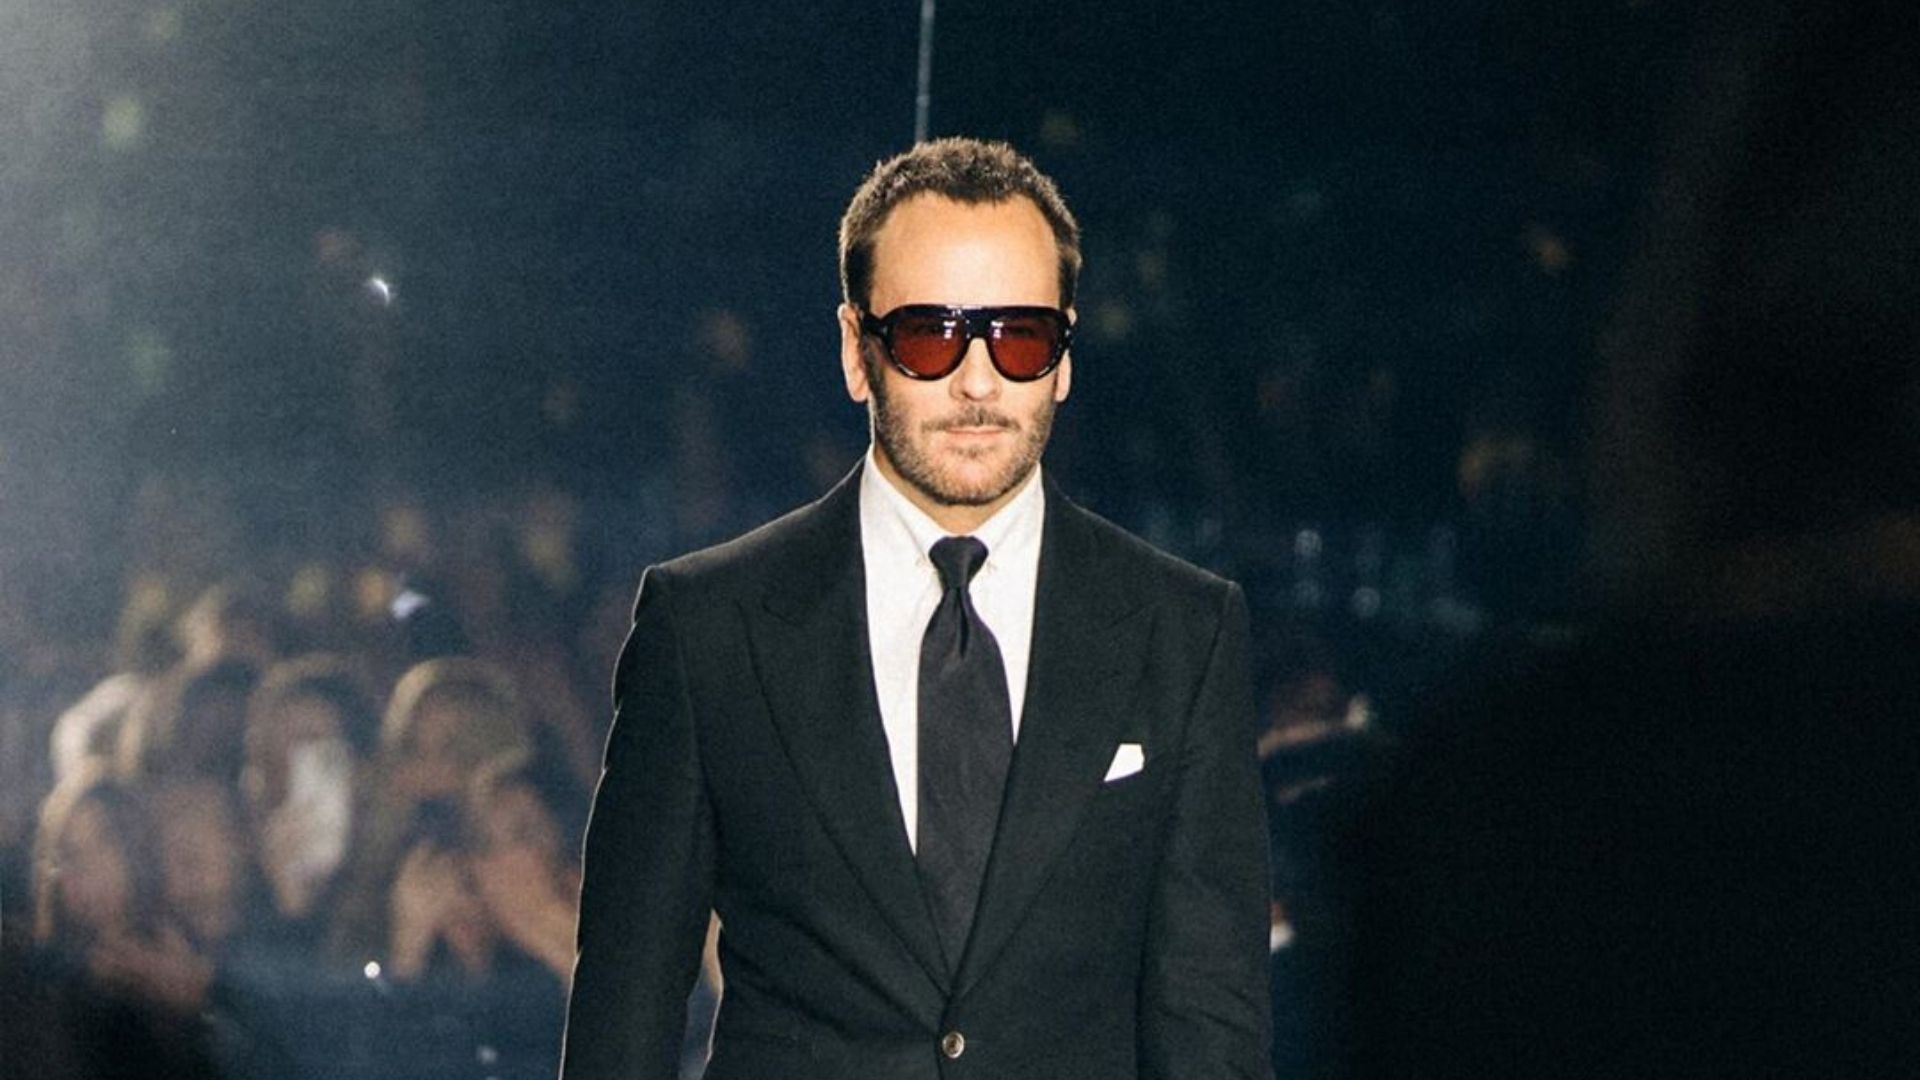 Tom Ford Show In Los Angeles: Did Tom Ford Betray NYFW? | Harper's ...